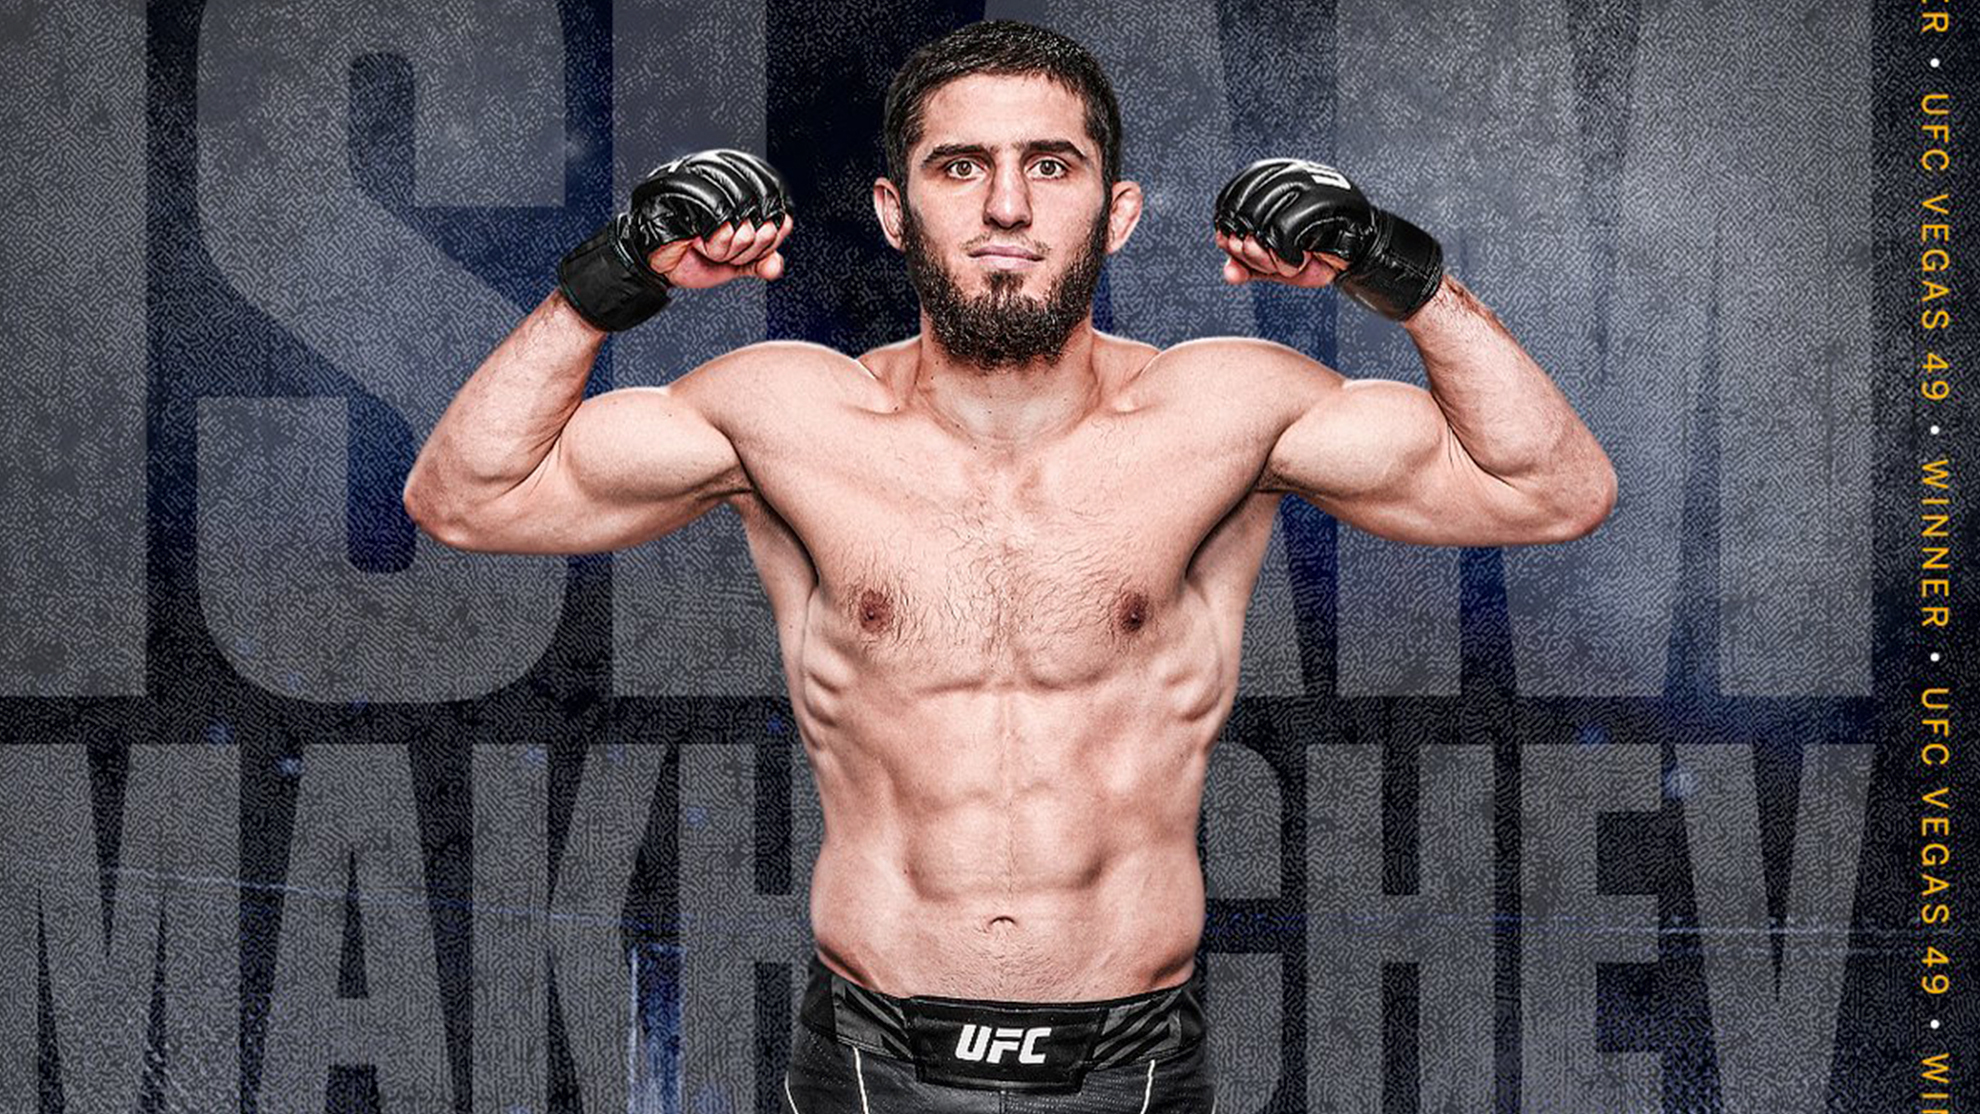 "If I'm already the top contender, why should I take such a big risk?" Arman Tsarukyan rationalizes his decision to turn down the UFC's offer to fight Islam Makhachev on short notice